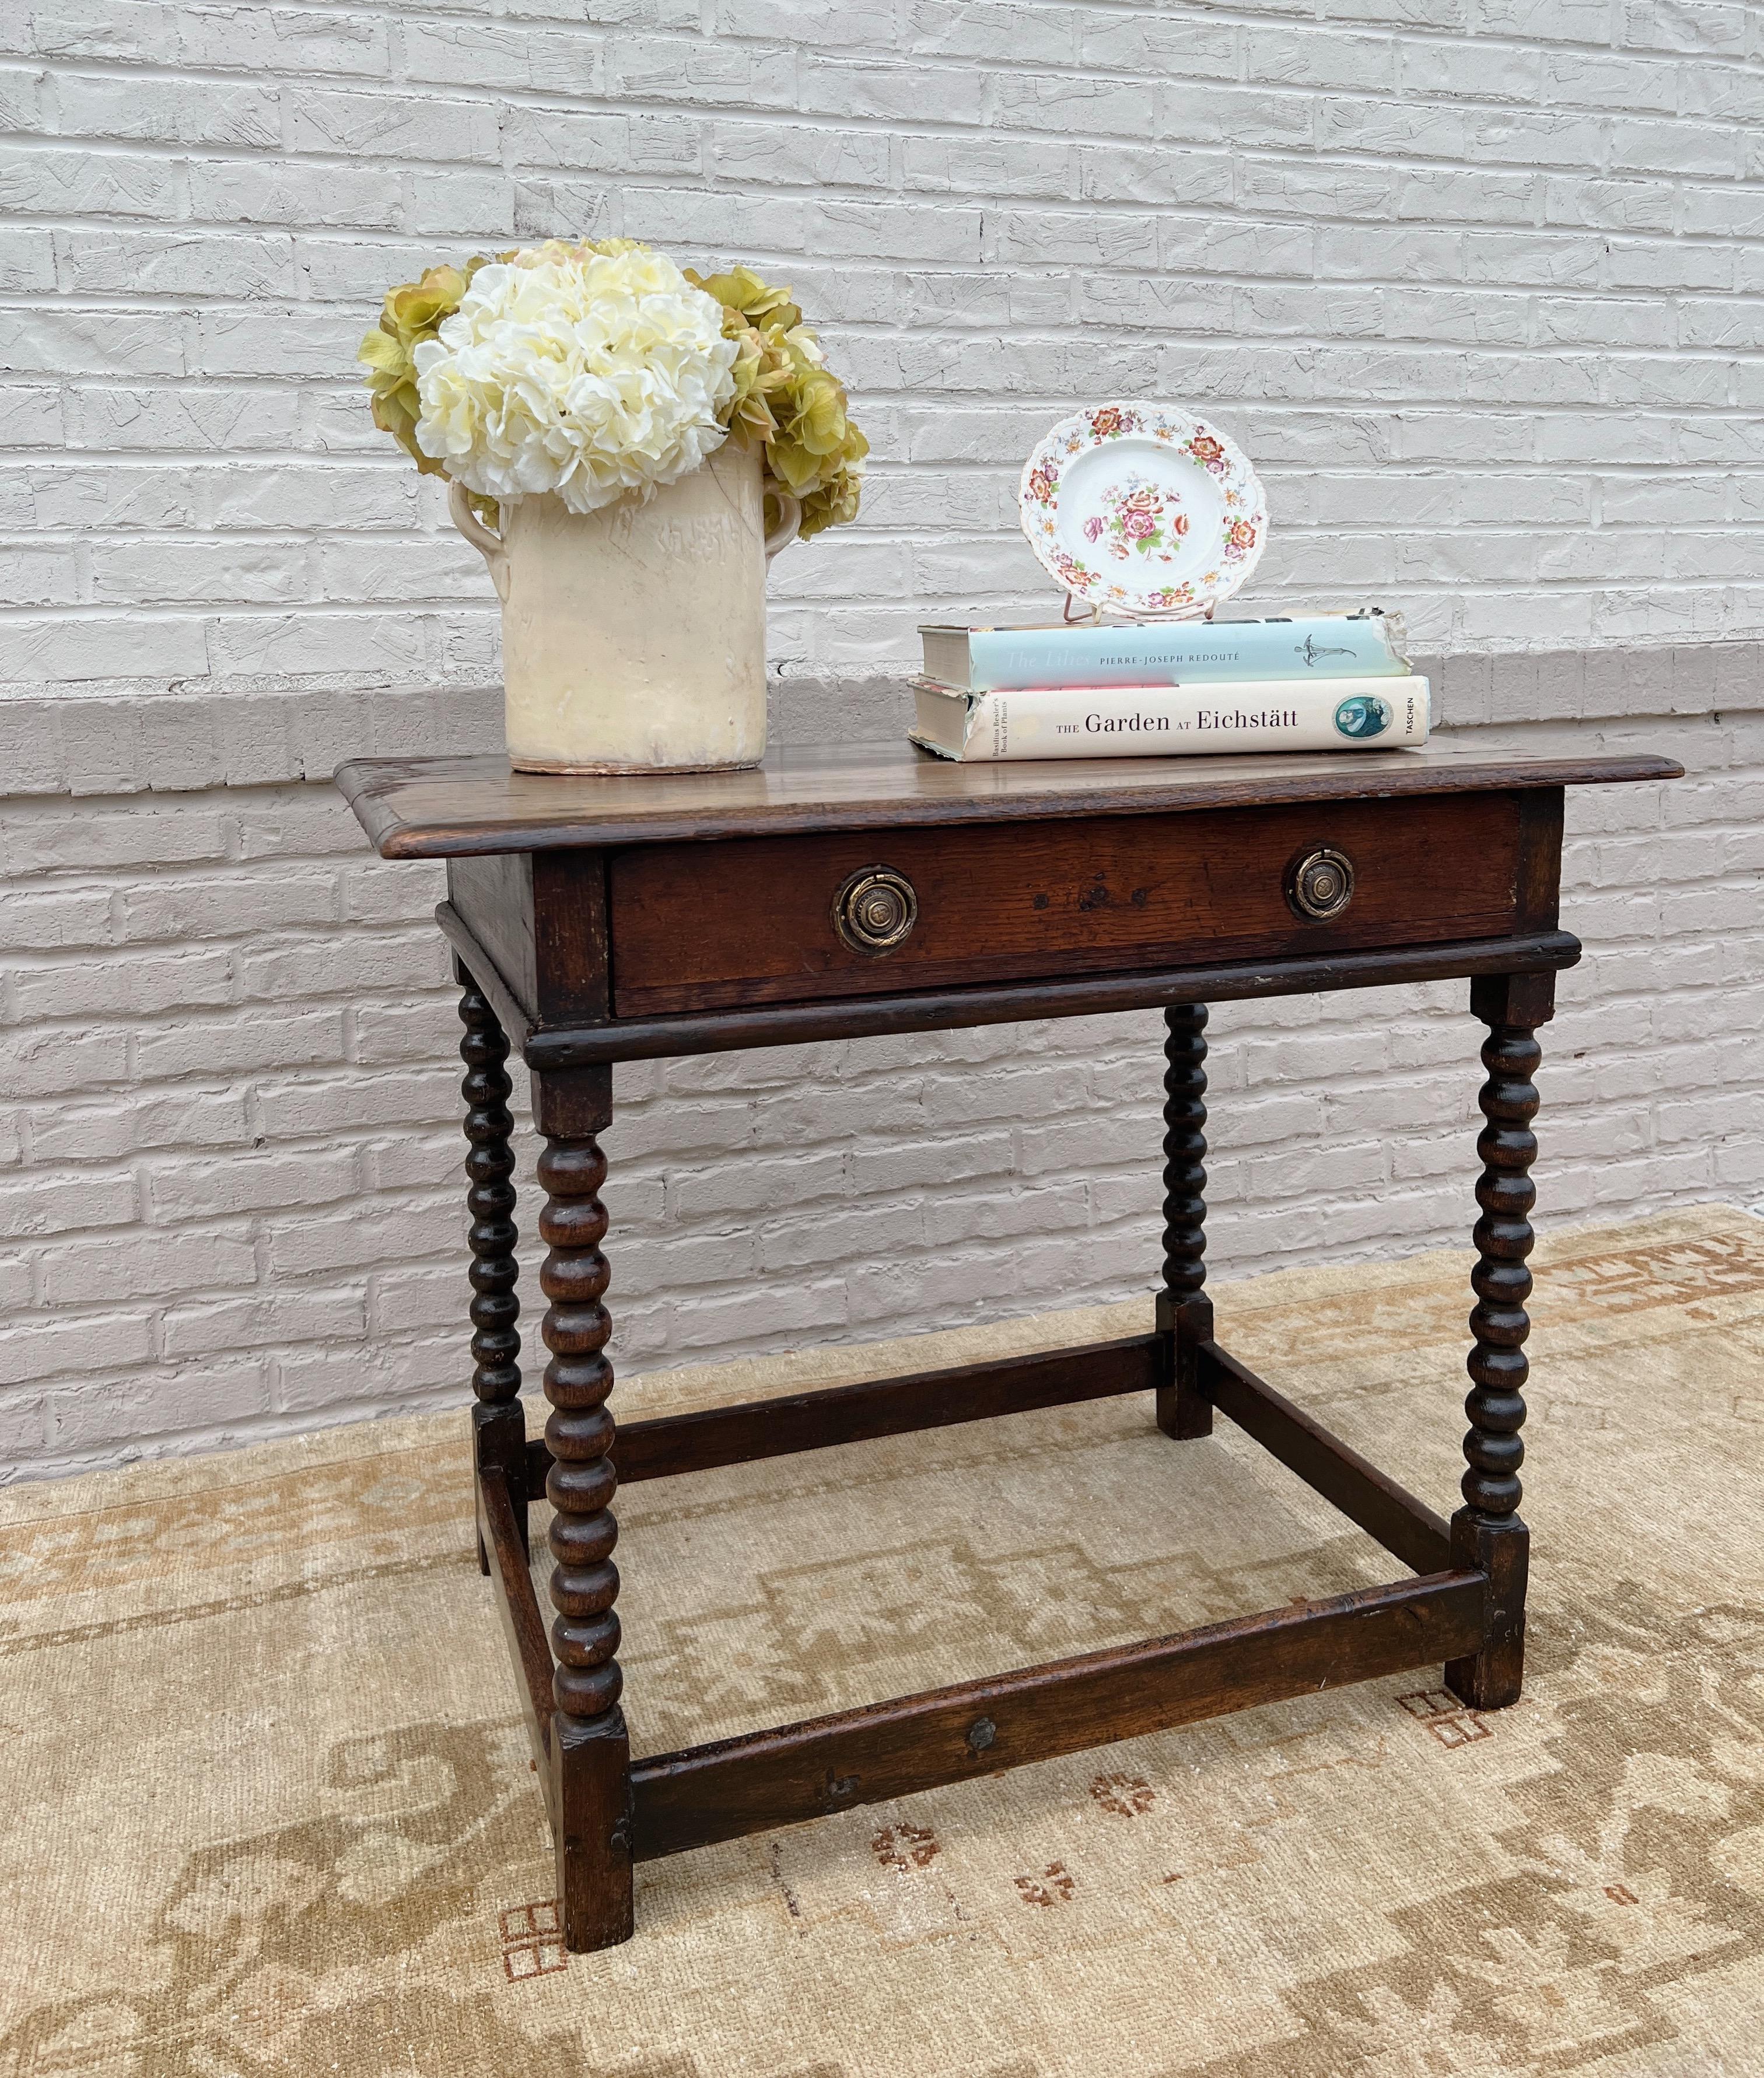 circa 19th century England. 

A beautiful English table that would make a lovely nightstand, end table, or dressing table. Features a molded edge rectangular top over a single drawer with brass hardware. Supported by bobbin legs and box stretcher.